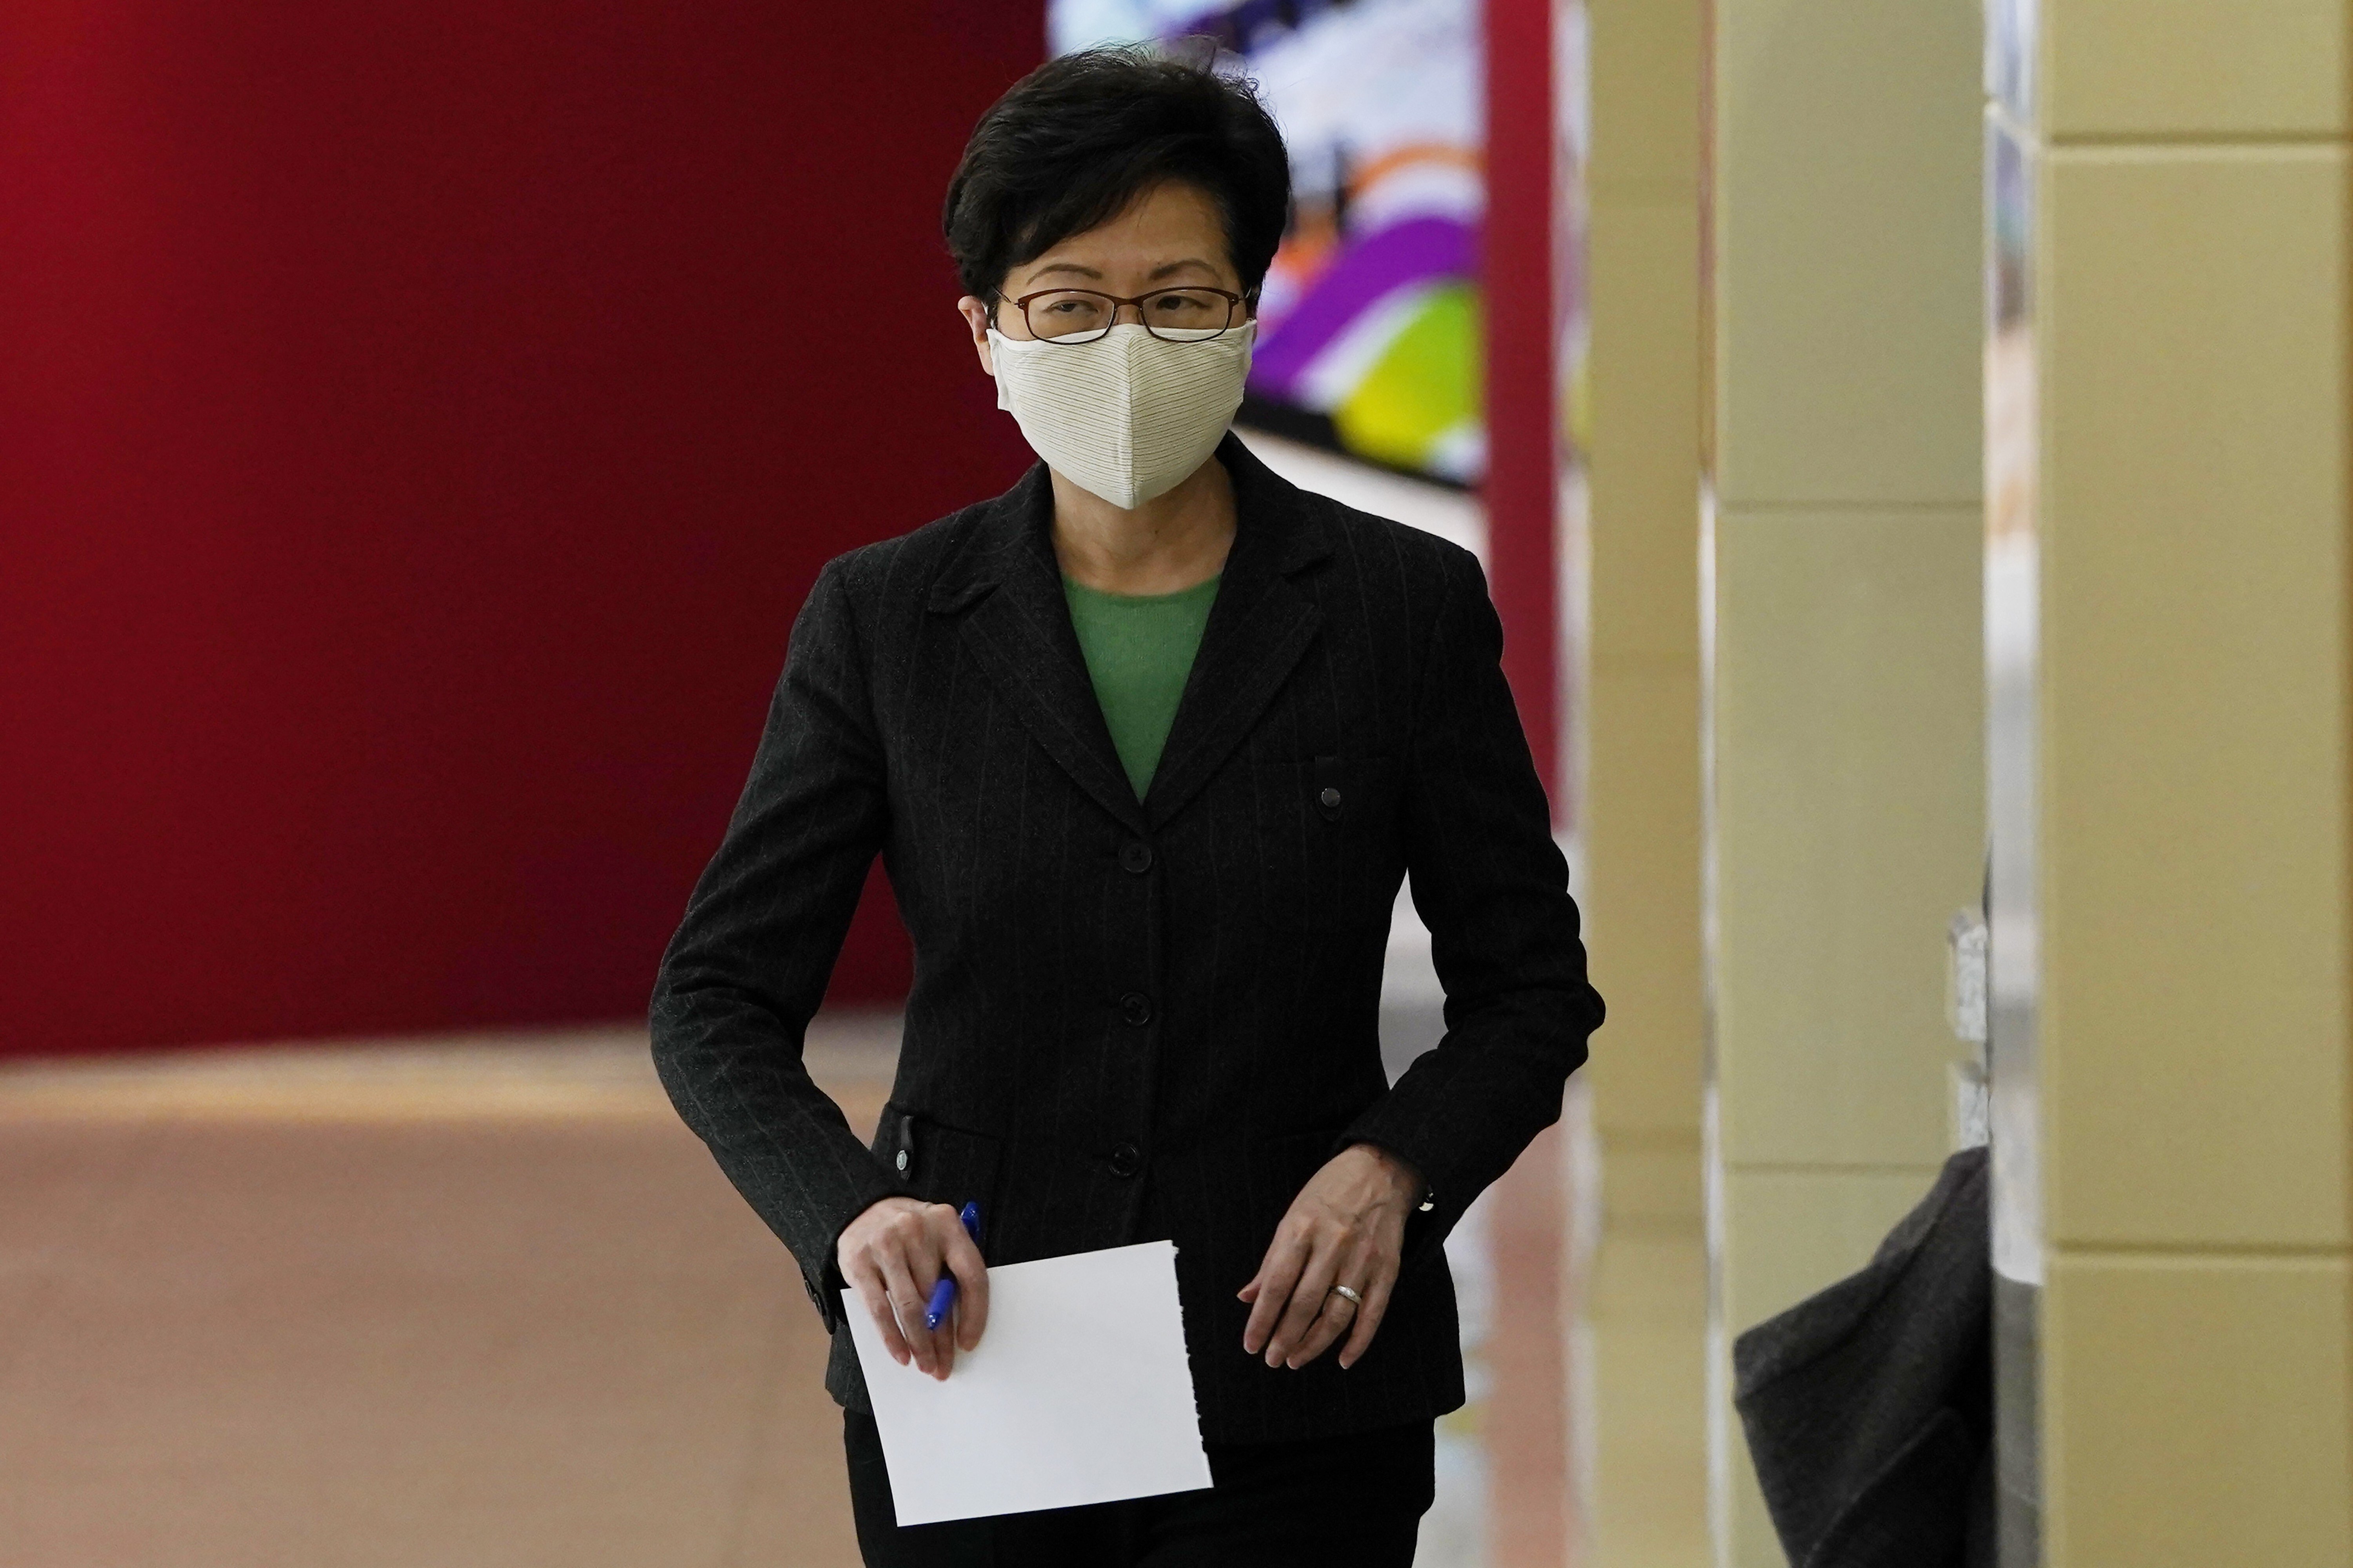 Hong Kong Chief Executive Carrie Lam arrives for a press conference in Beijing on Friday. Photo: AP